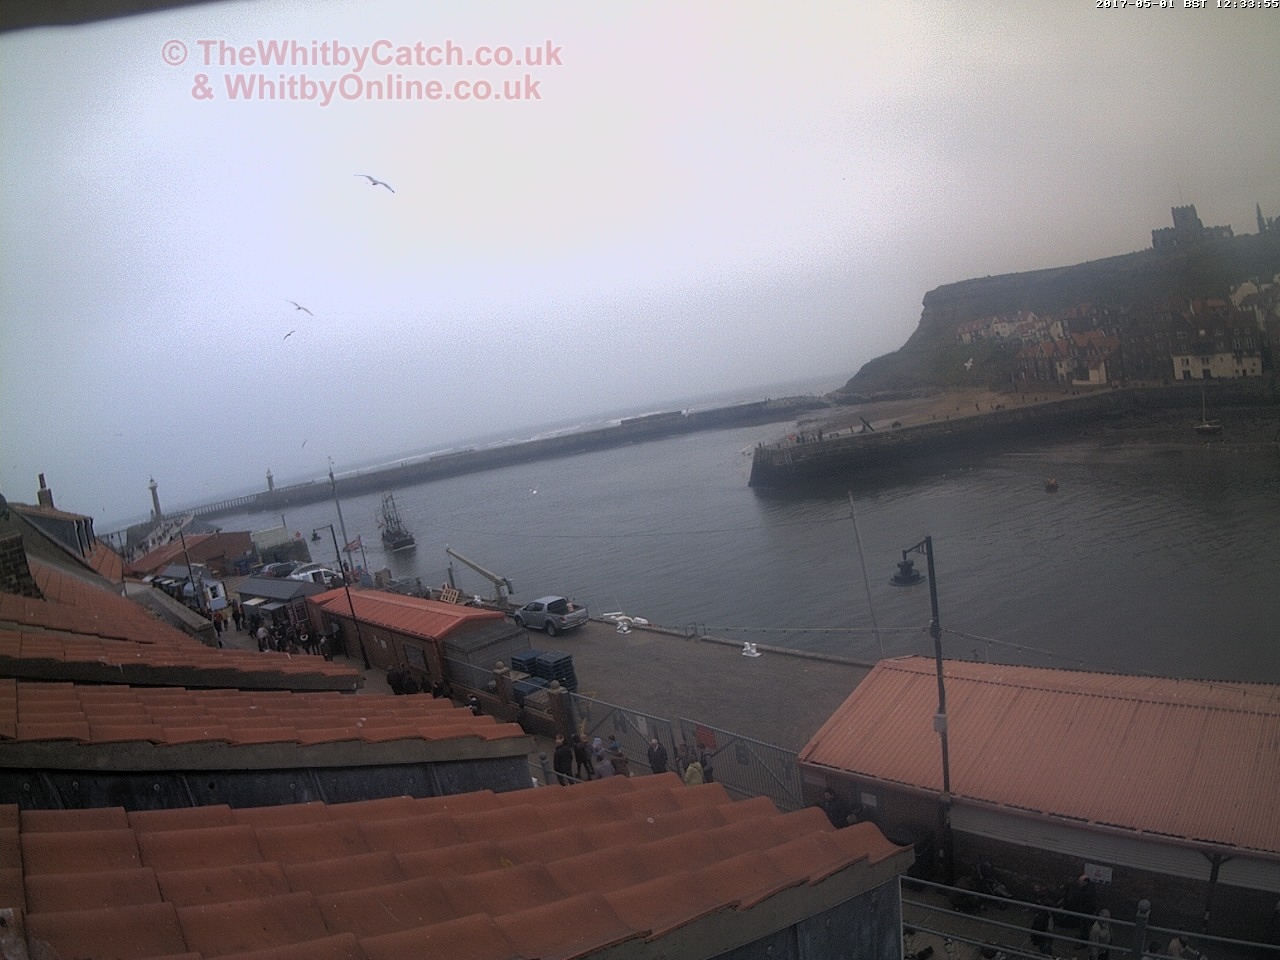 Whitby Mon 1st May 2017 12:34.